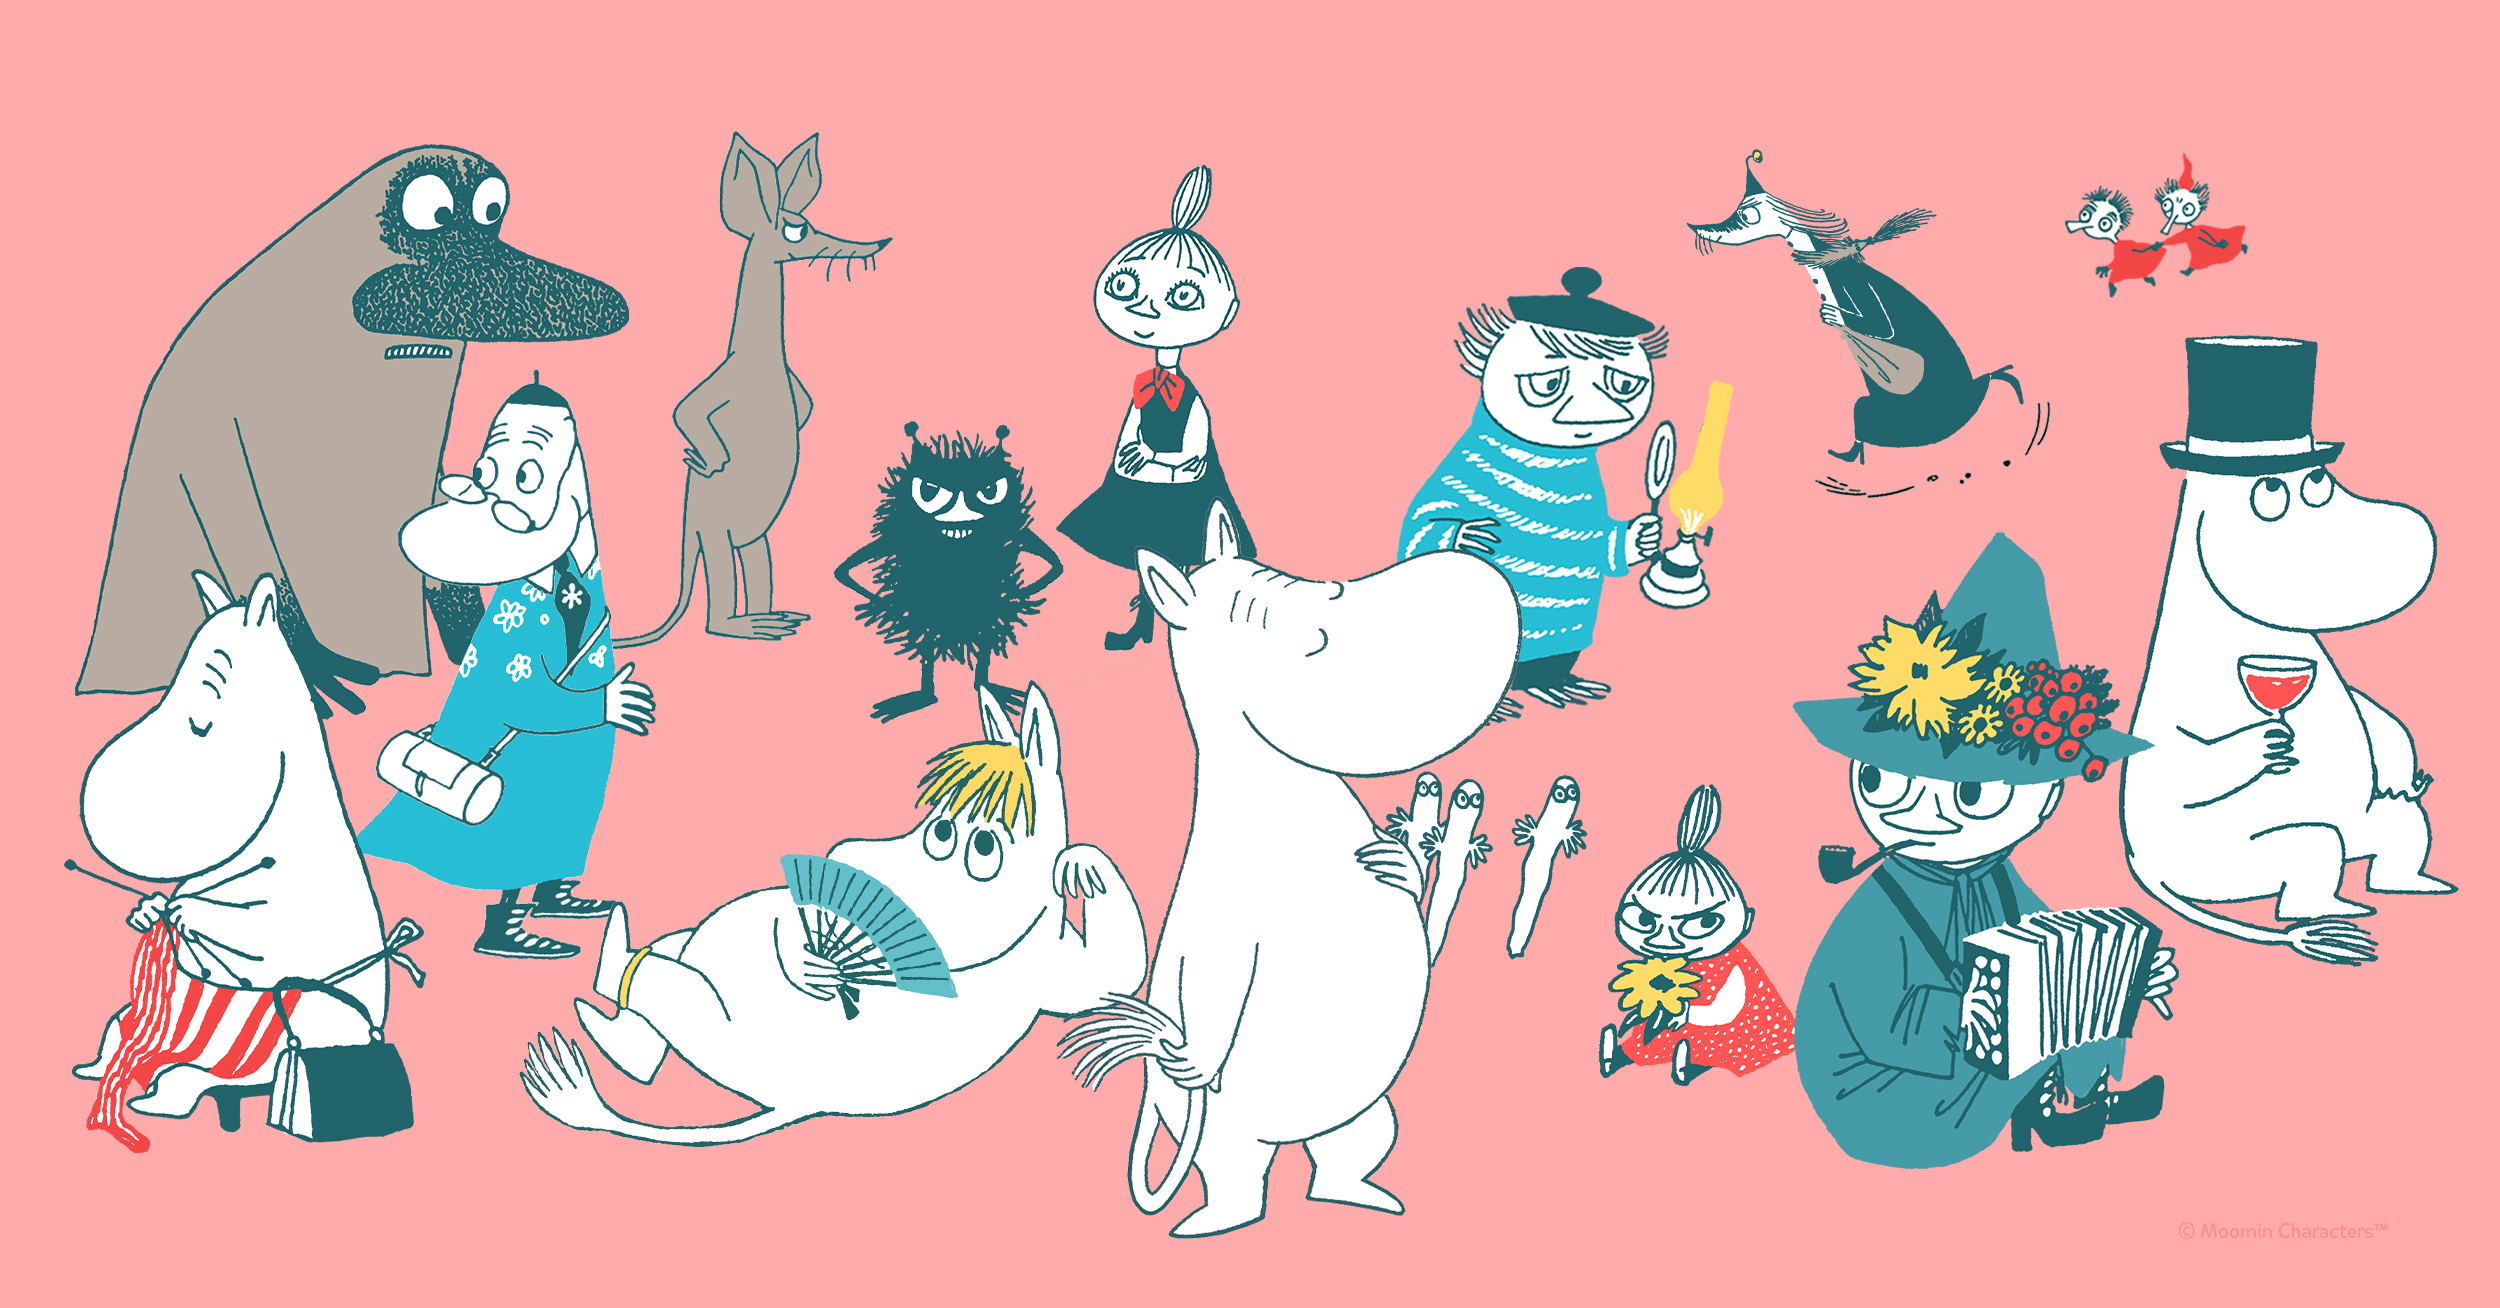 All About The Moomins